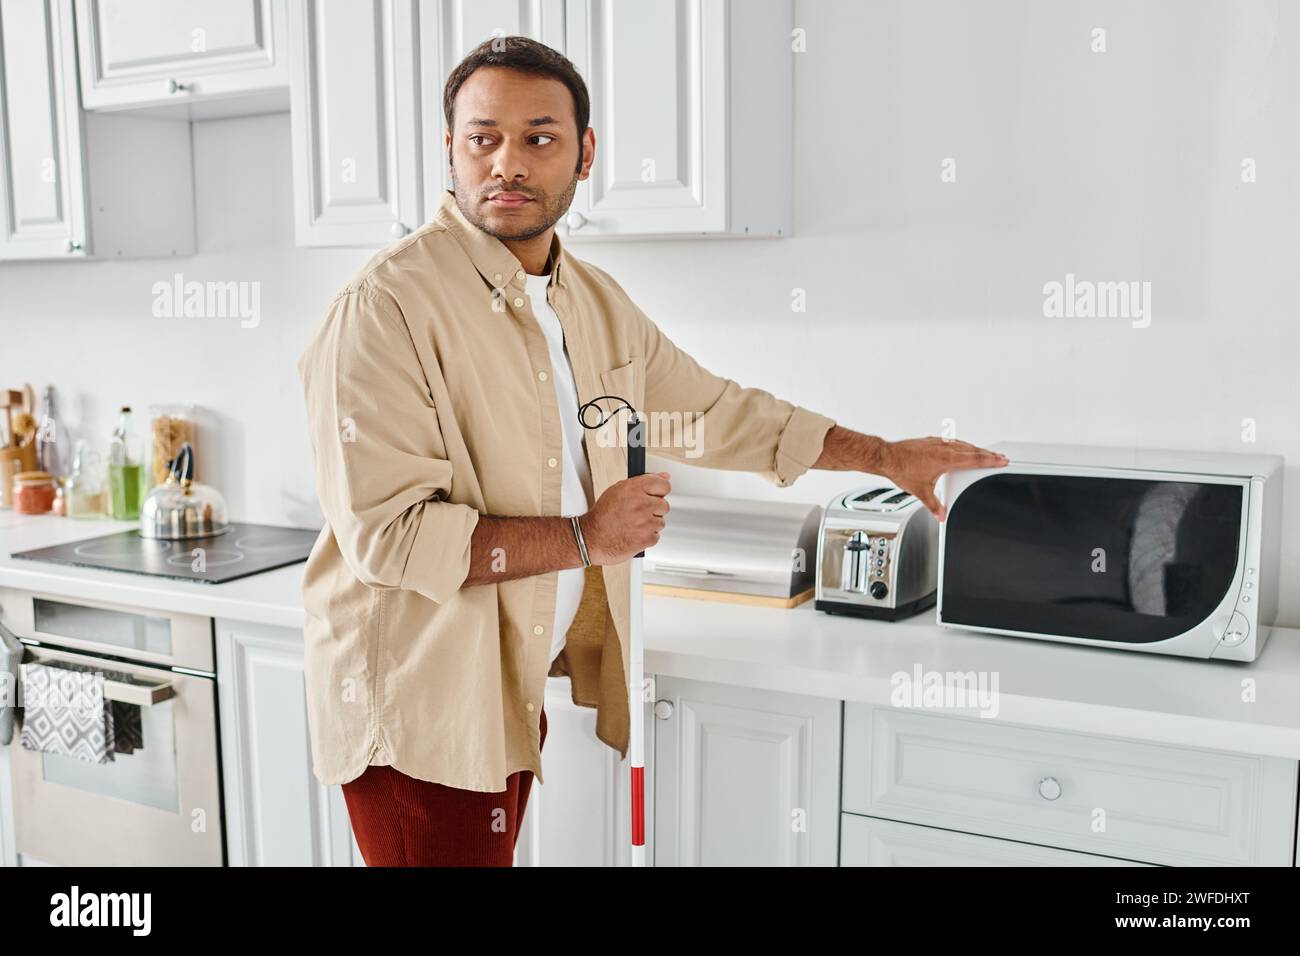 good looking indian man with visual impairment wearing cozy homewear and preparing food, disabled Stock Photo